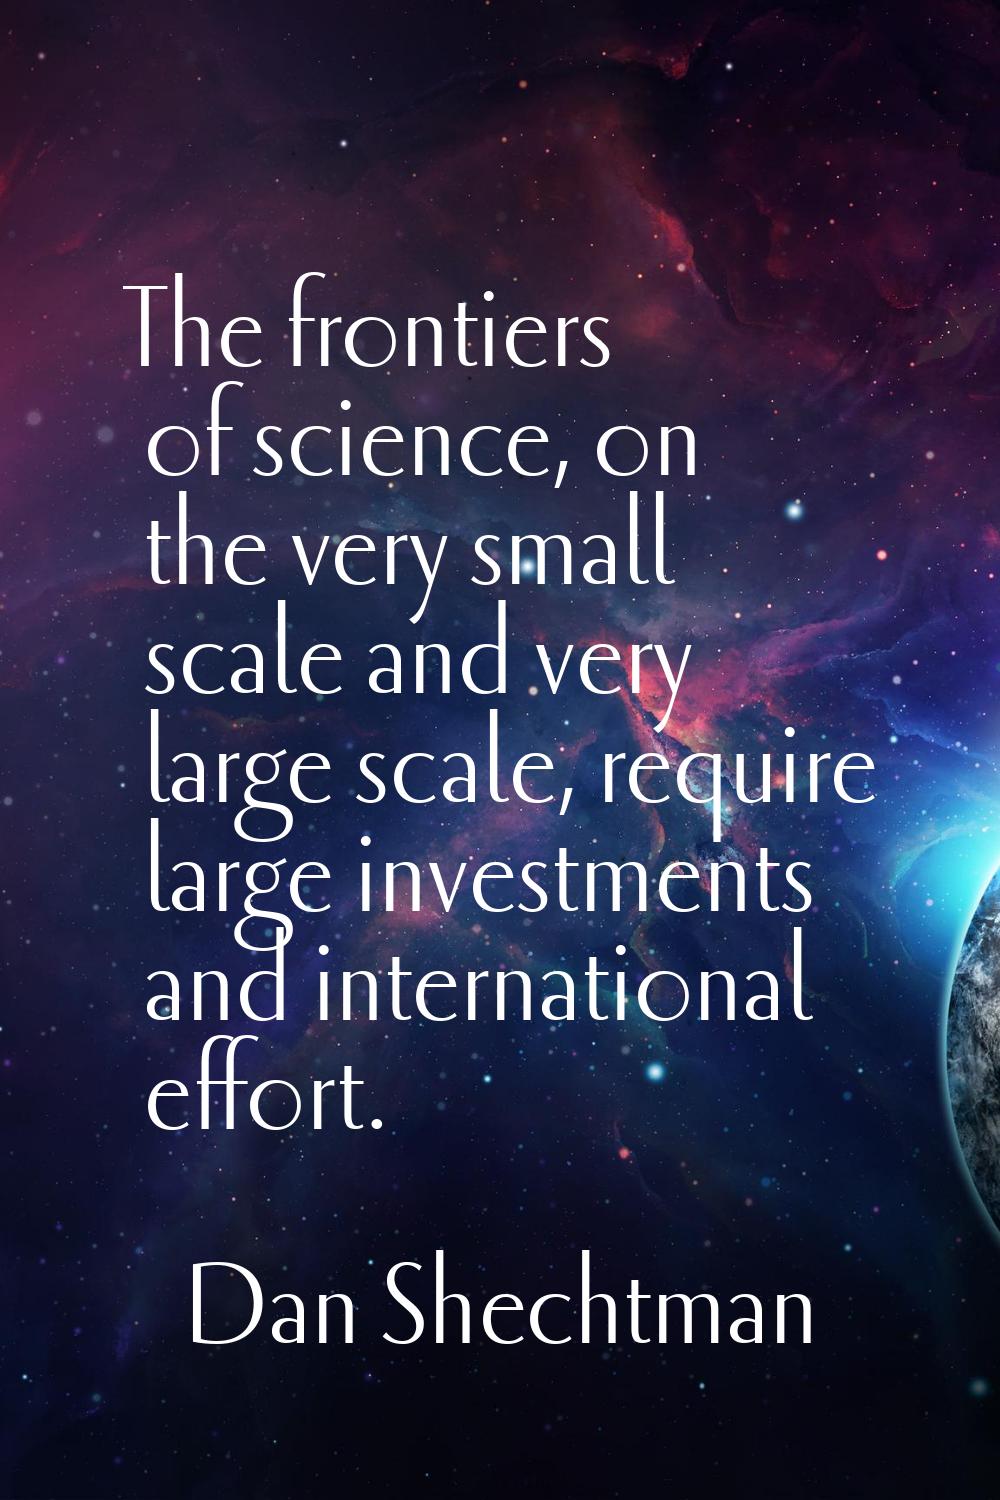 The frontiers of science, on the very small scale and very large scale, require large investments a